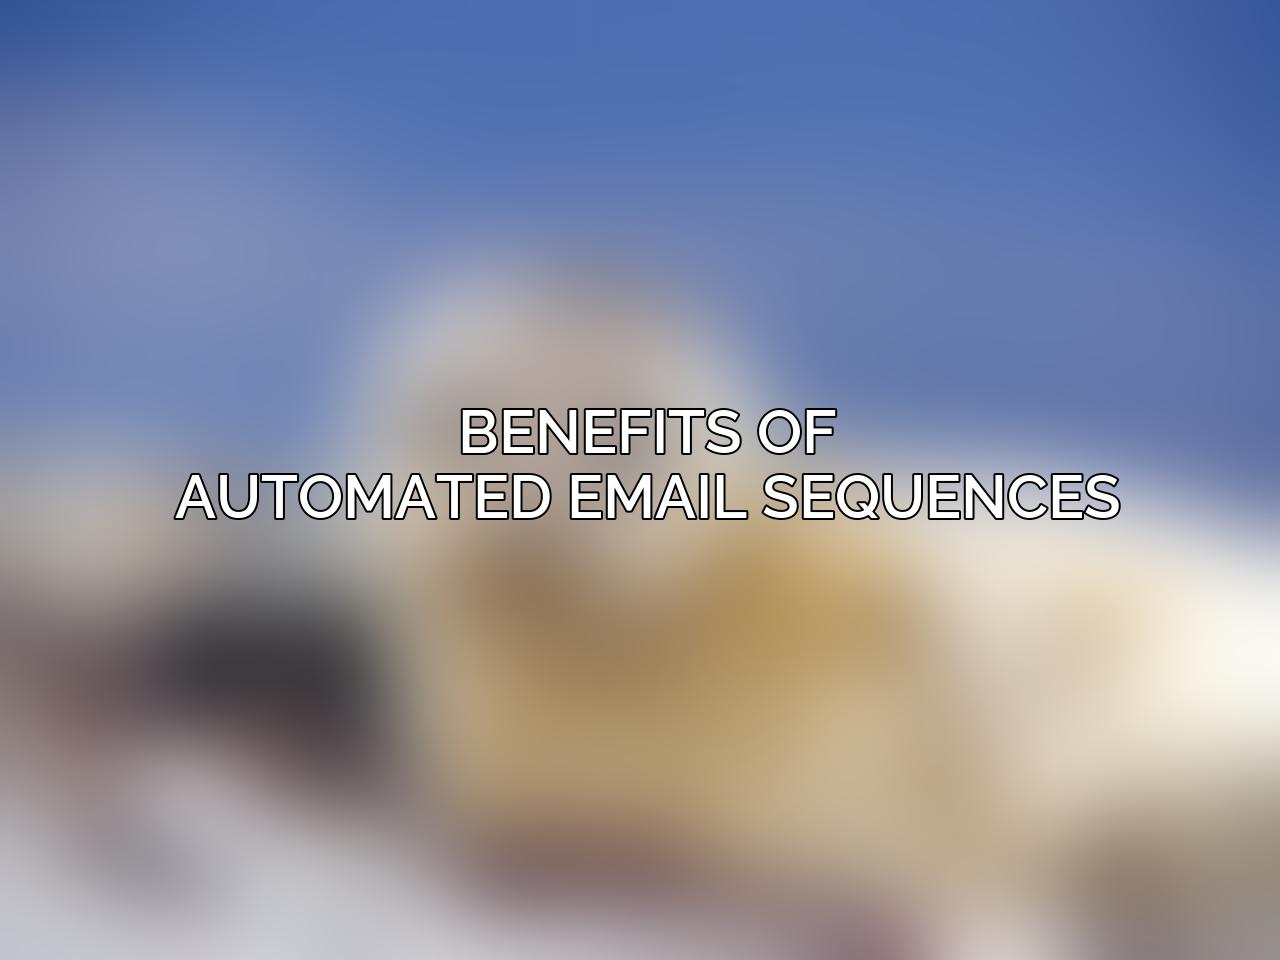 Benefits of Automated Email Sequences